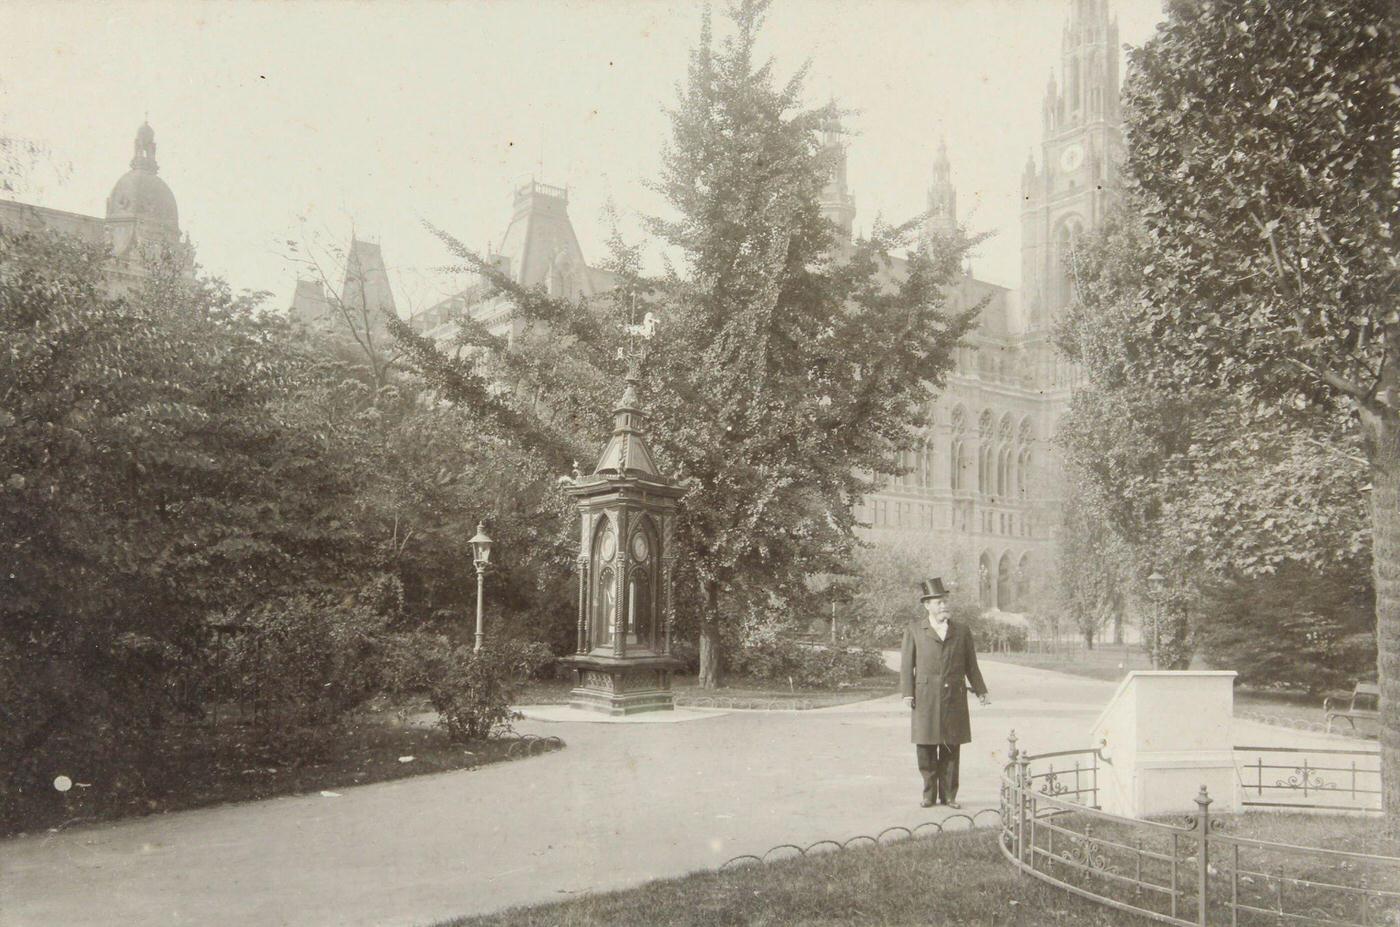 The Viennese Mayor Karl Lueger At City Hall Park, About 1905